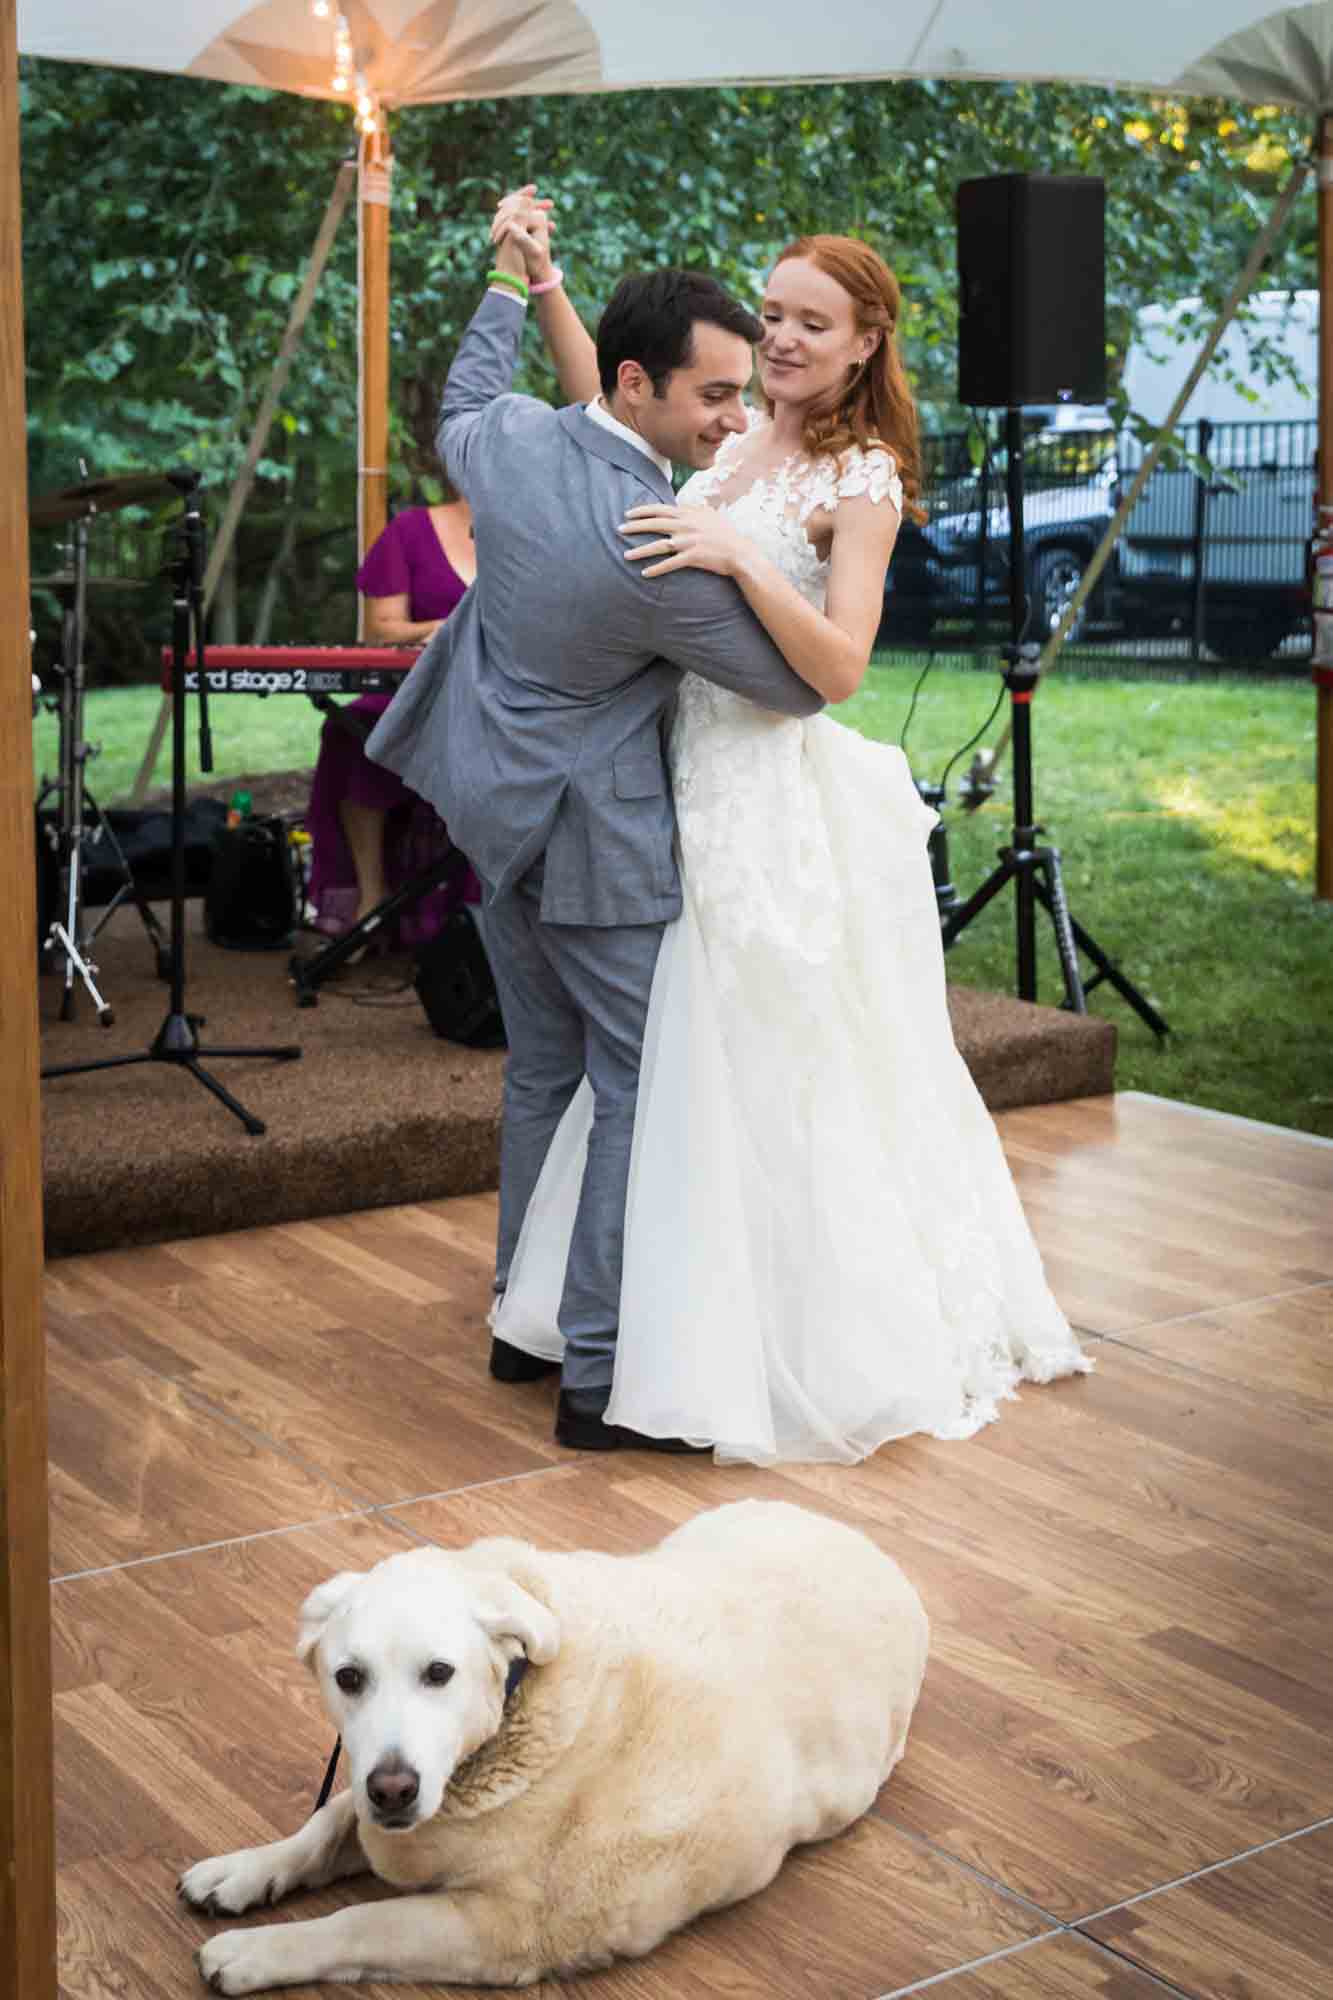 Bride and groom dancing in front of white dog on dance floor